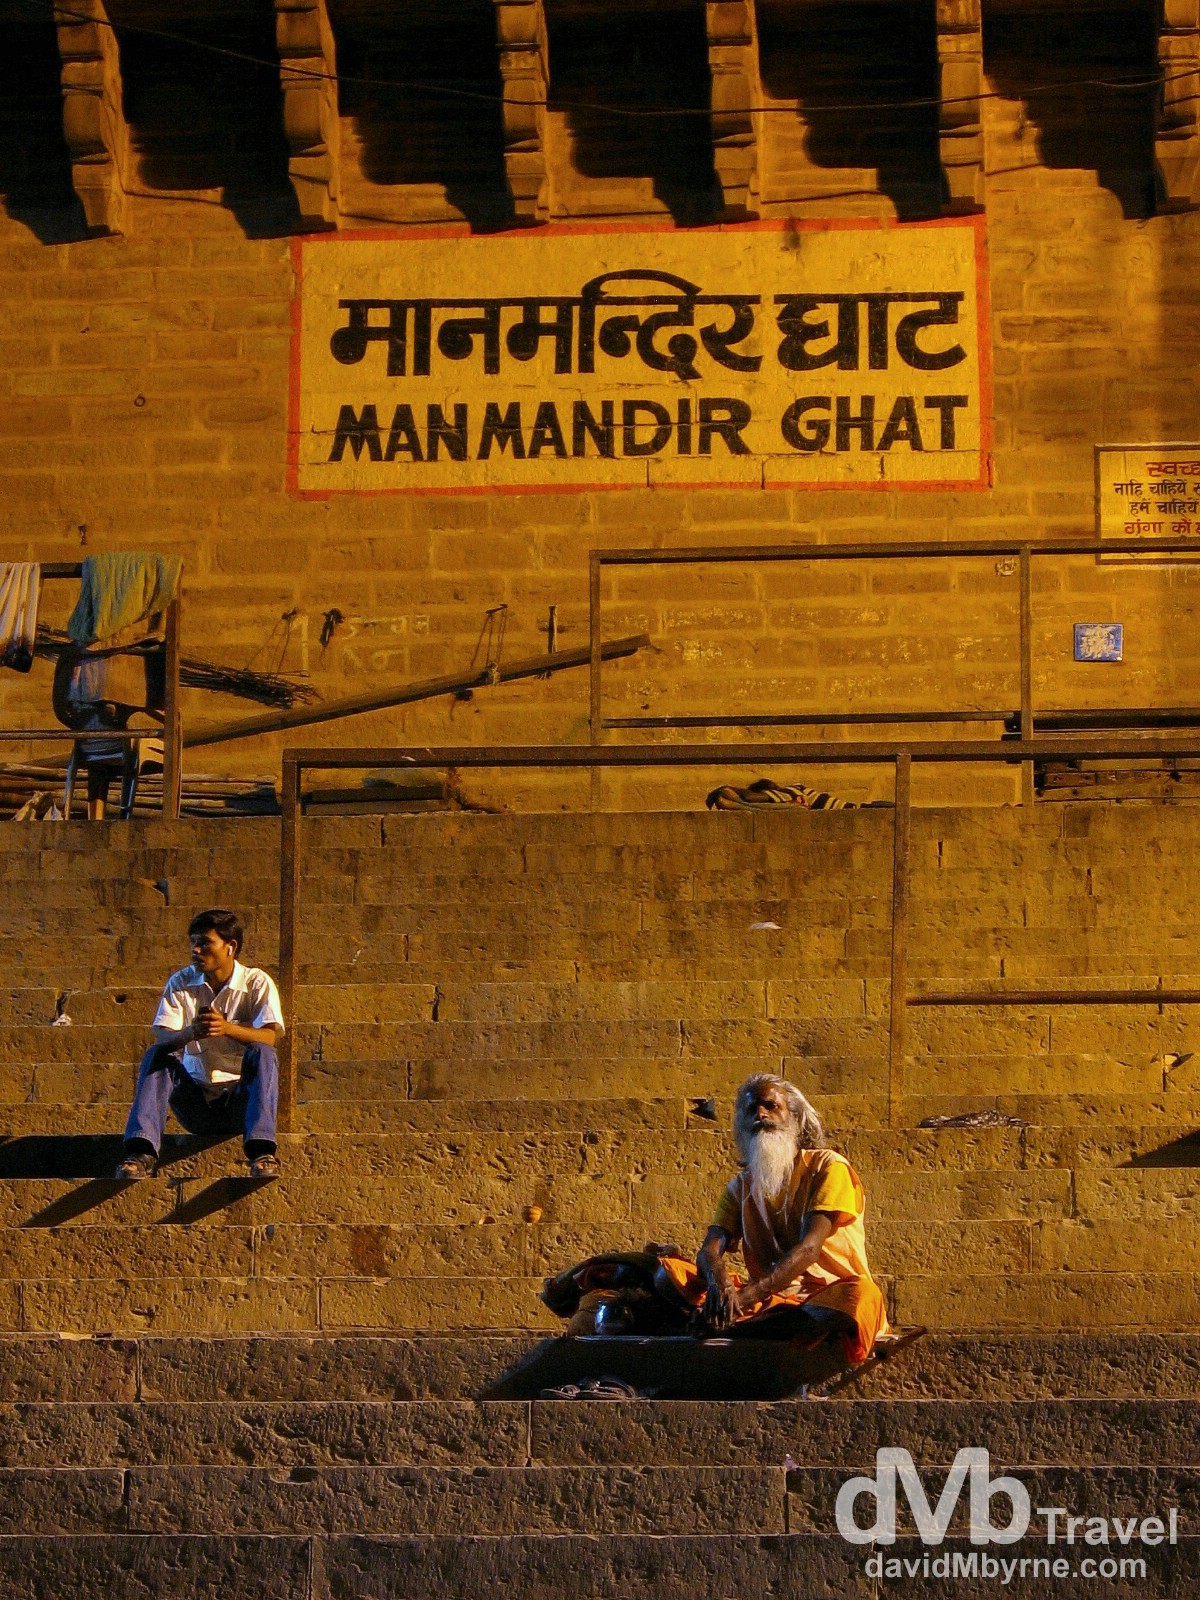 A Sadhu, a Hindu holy man on the path to enlightenment, and a local sitting at Manmandir Ghat, Varanasi, India. Ghats have been used in India for centuries, primarily for worship, but also for bathing and washing clothes. They are also used for the final ritual of cremation and some of Varanasi’s Ghats are solely used for this purpose. March 18th 2008.